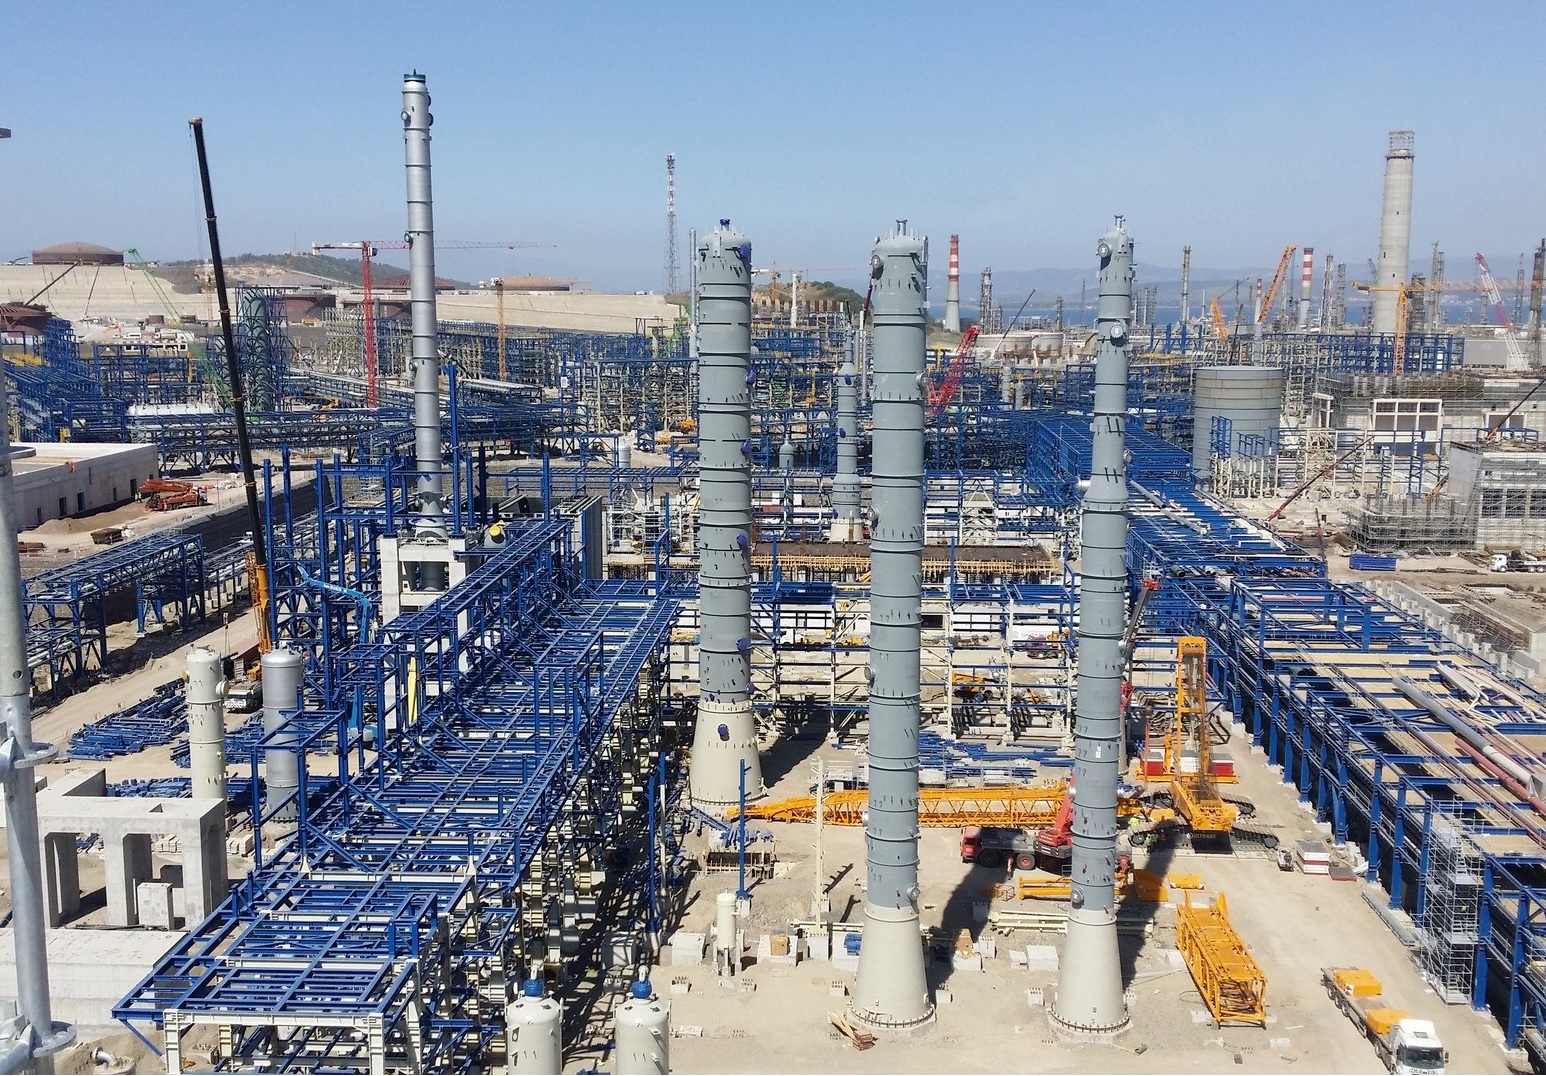 Piping, Pipe Support, NDT and PWHT, Equipment Erection, Refractory, Insulation, Painting, Electrical & Instrumentation of P1A, P2A and P2B areas of Socar Turkey Aegean Refinery.